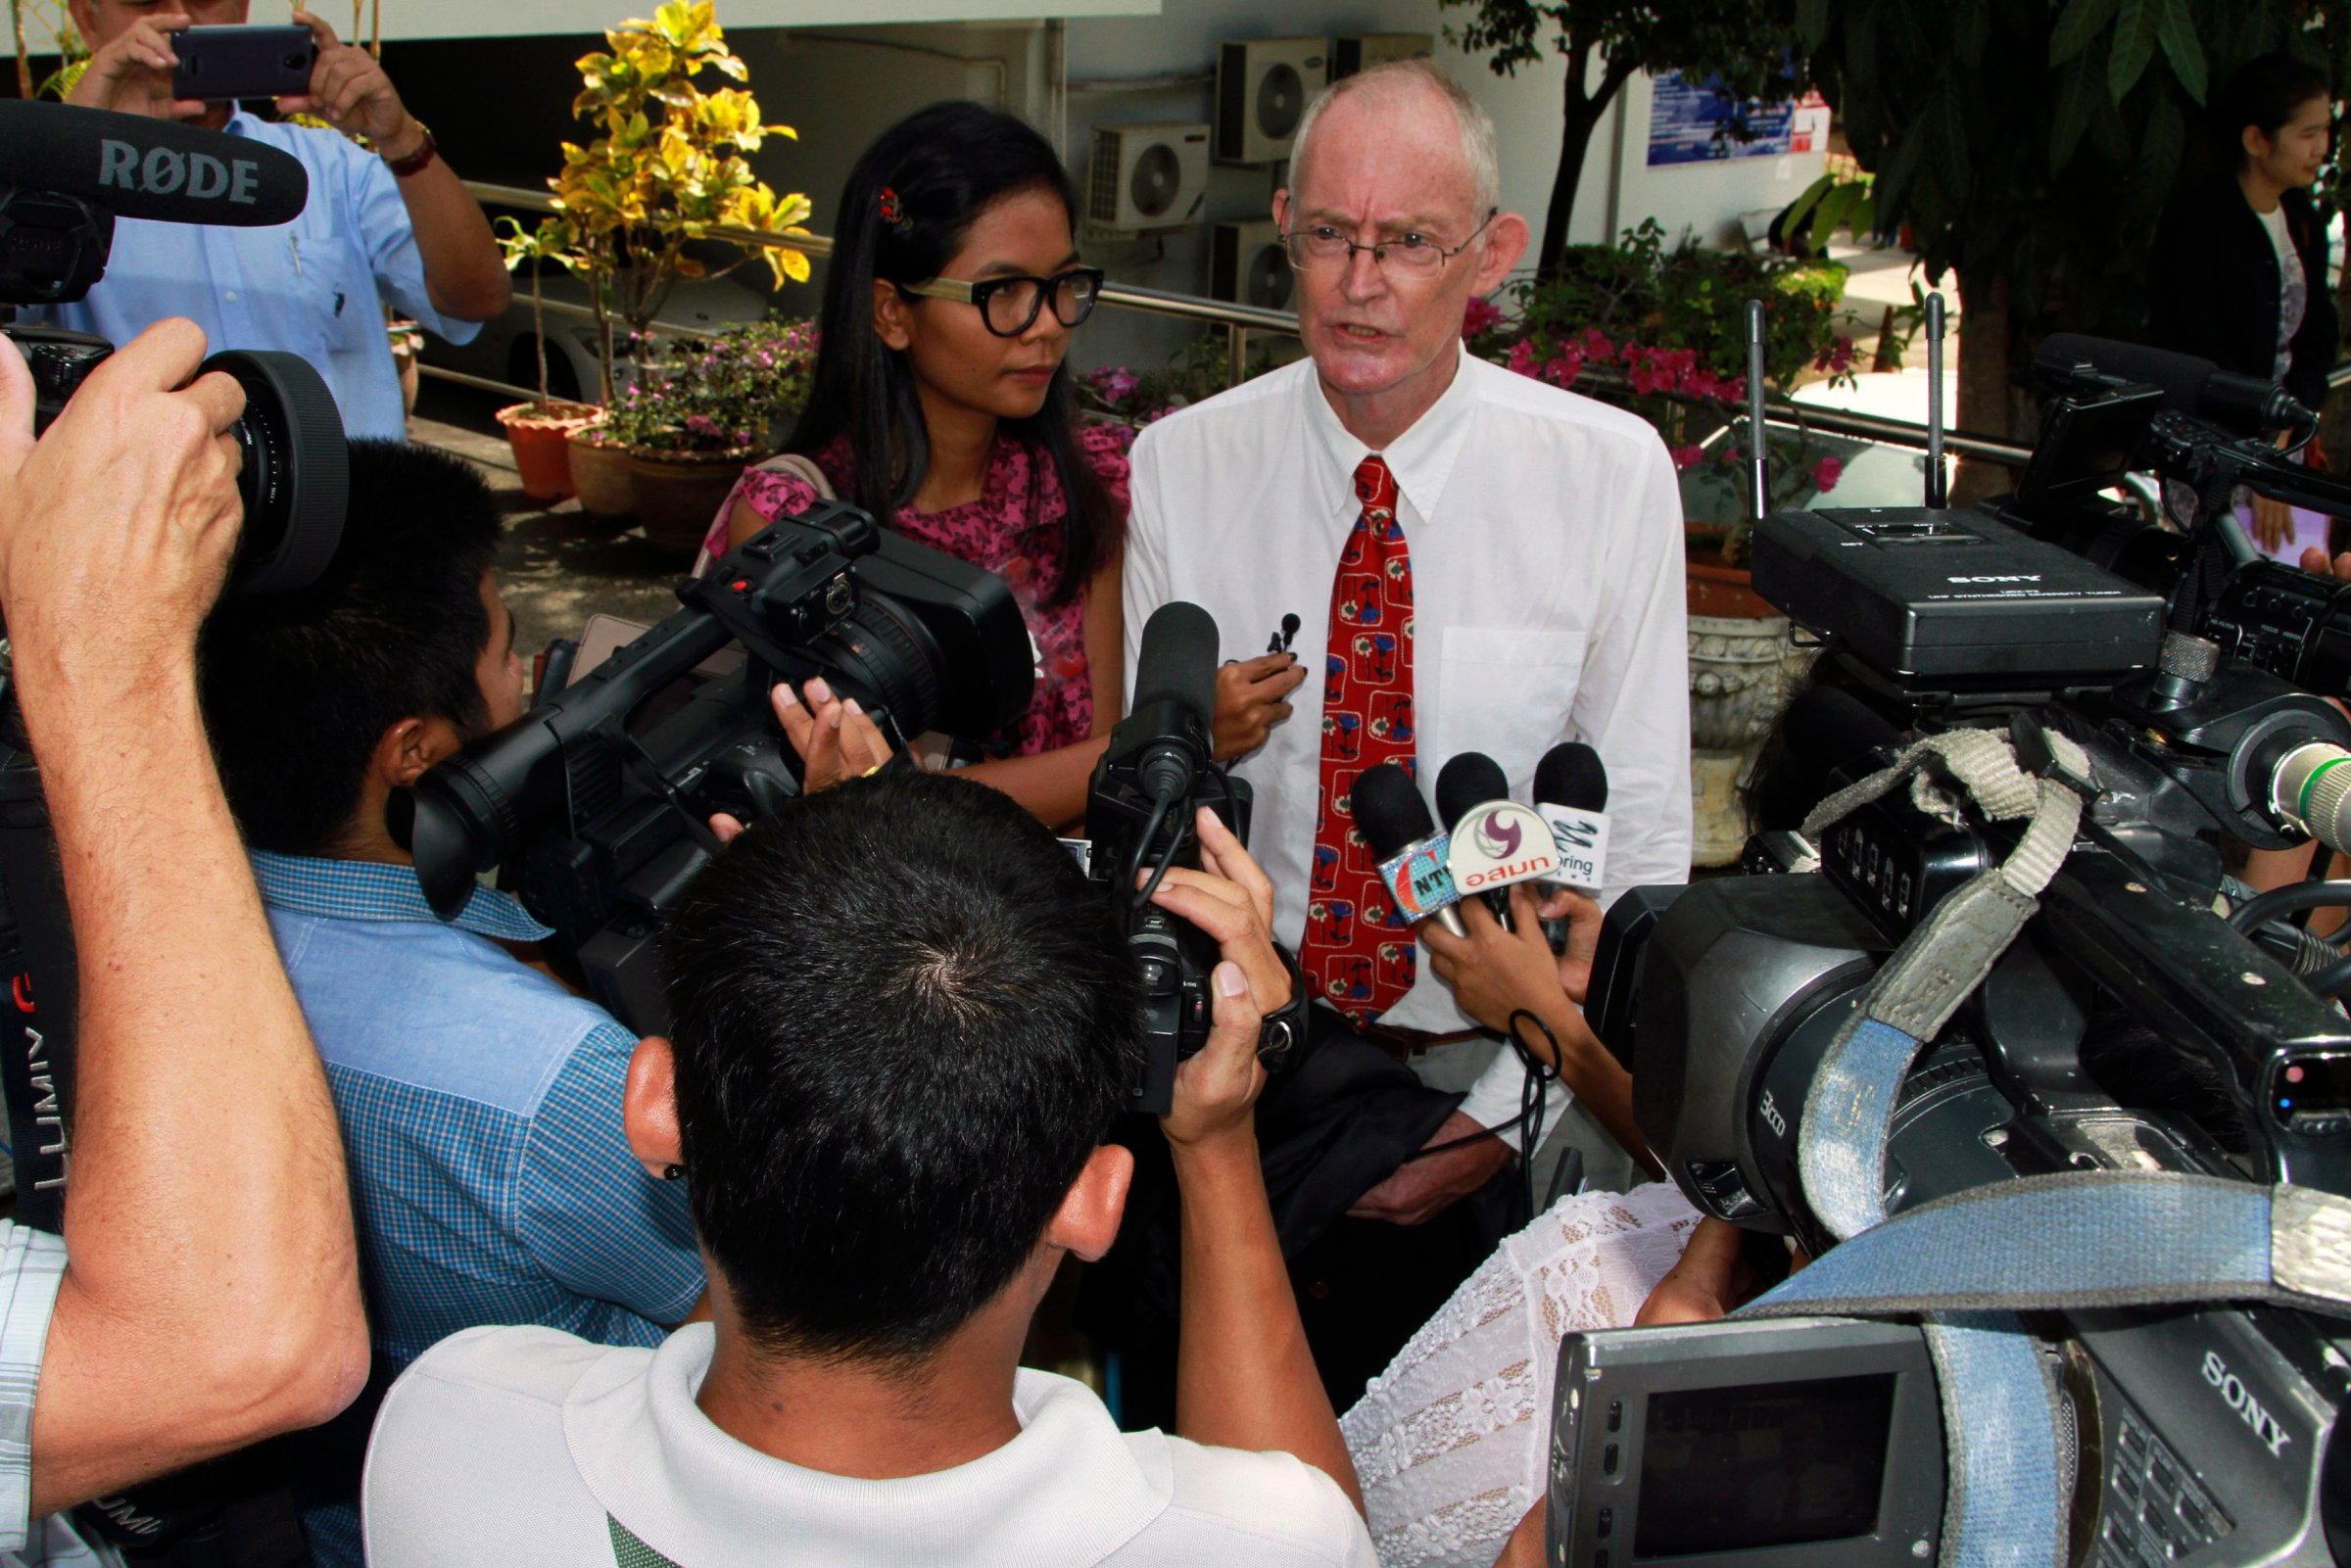 Morison and Sidasathian, reporters for the Phuketwan news website, speak to media as they arrive to a criminal court in Phuket